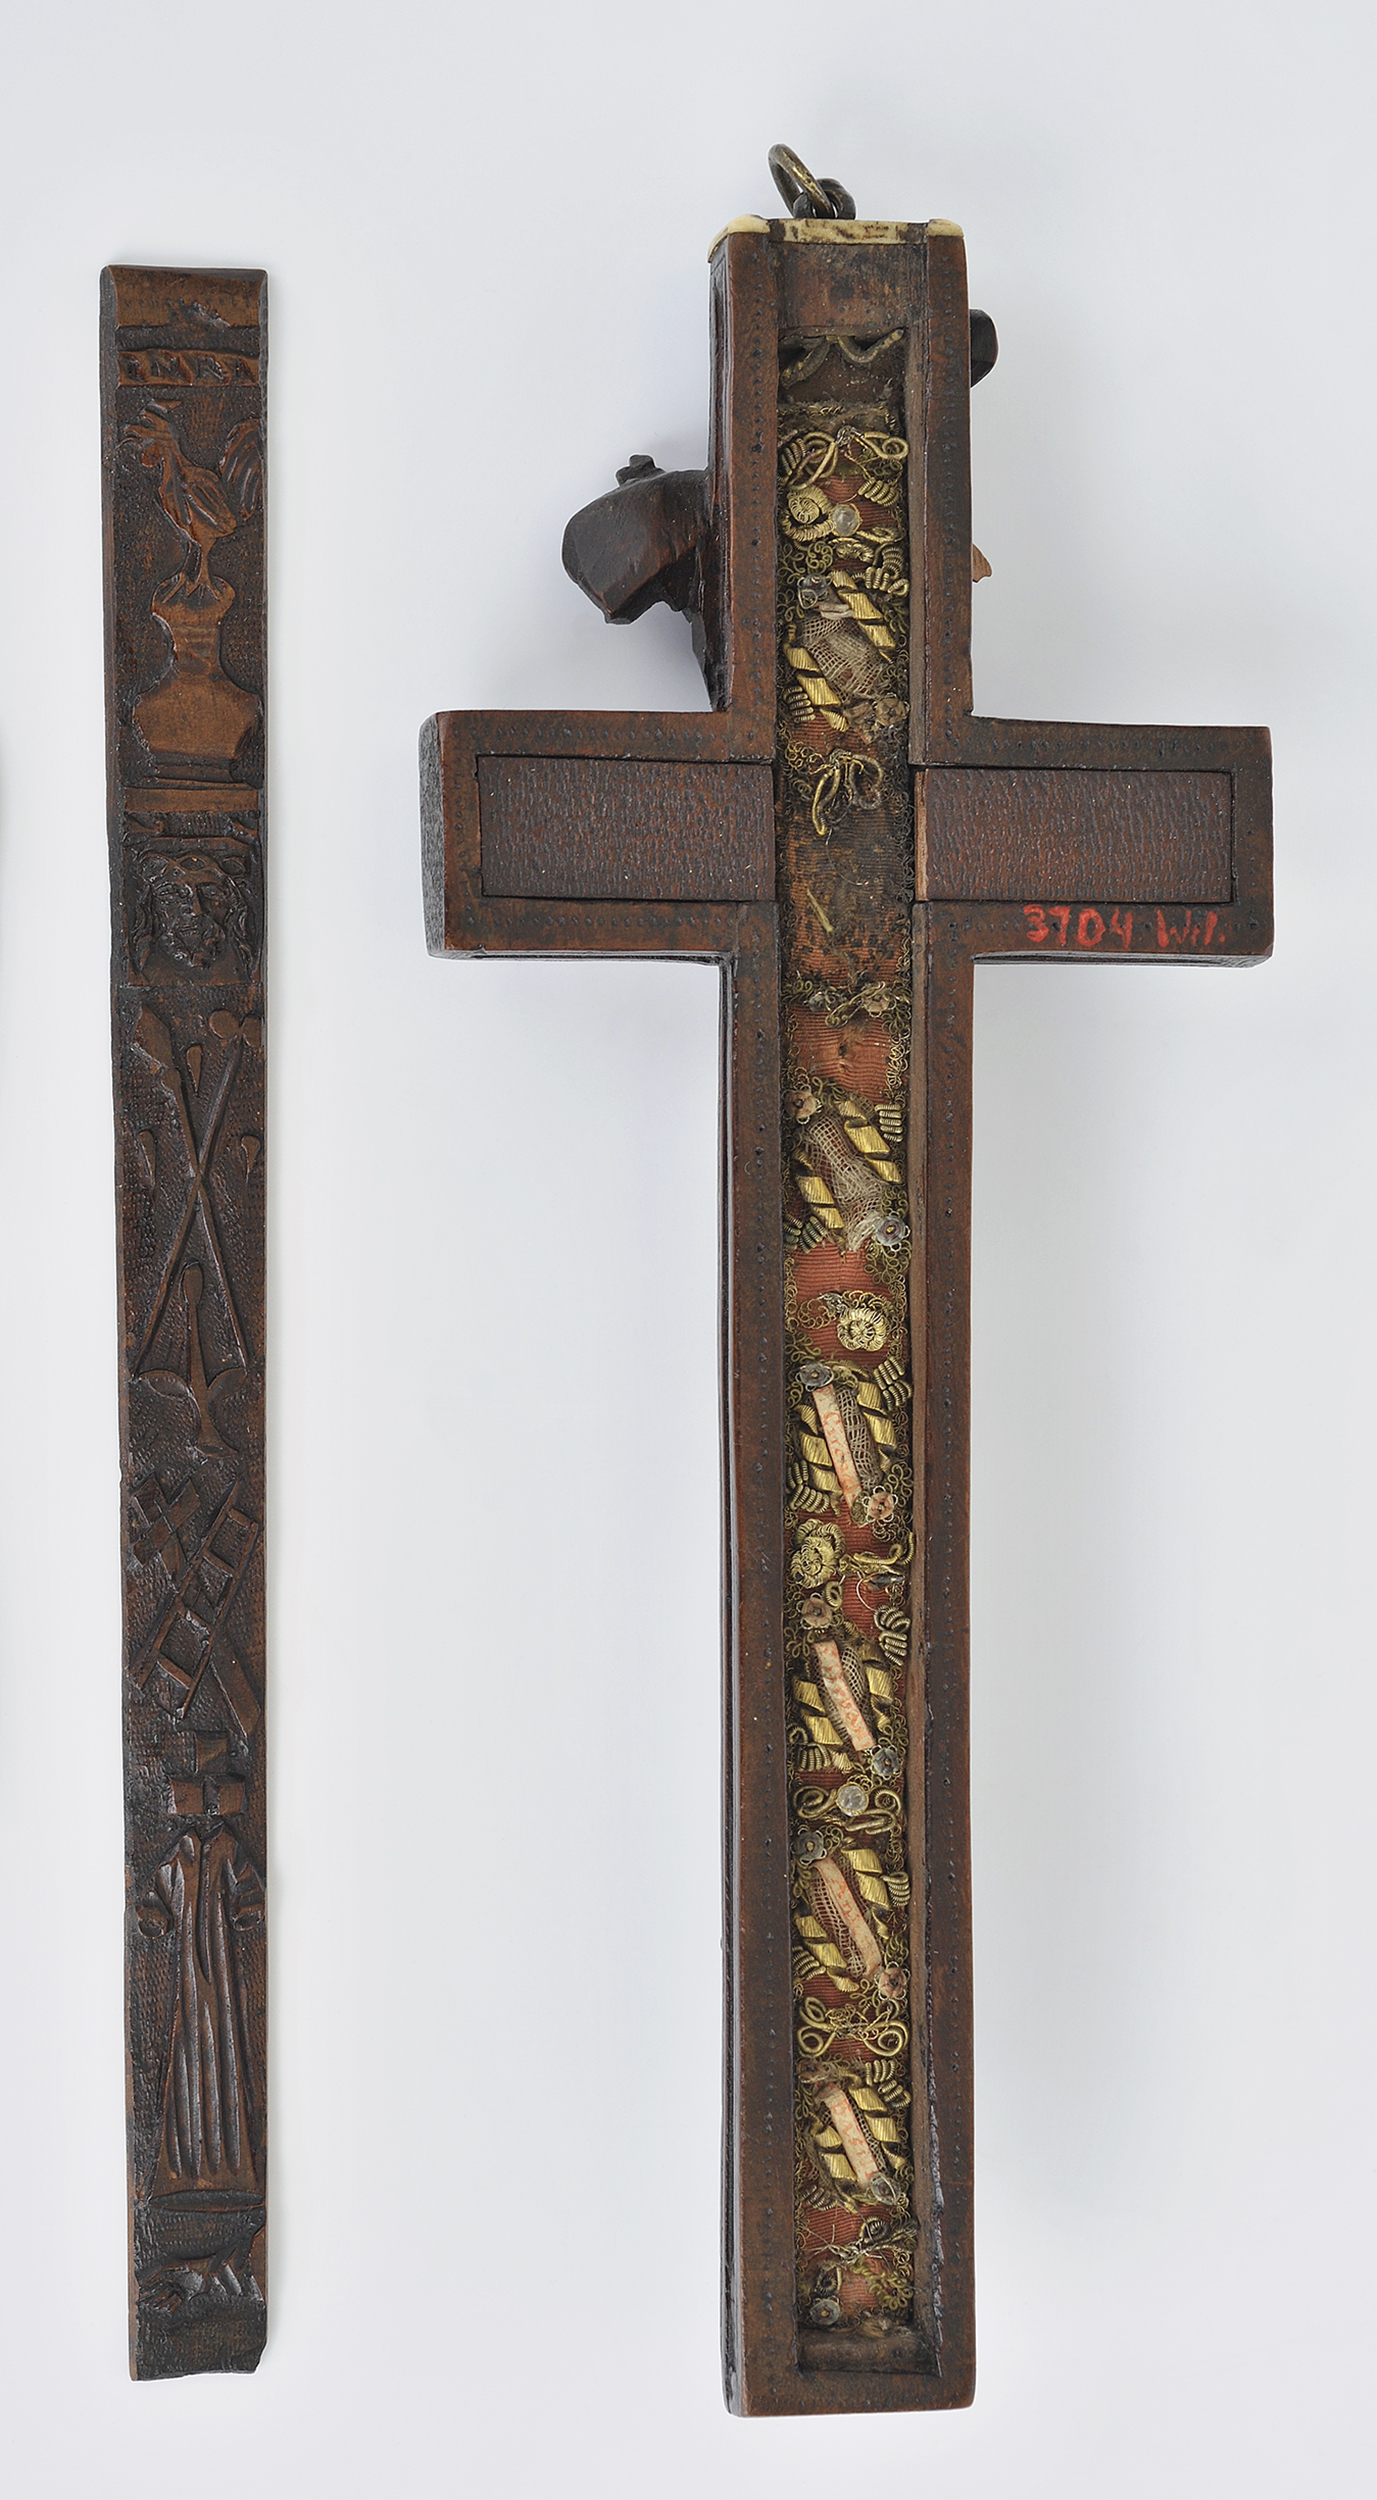 Crucifix Wil.3704 – In museums